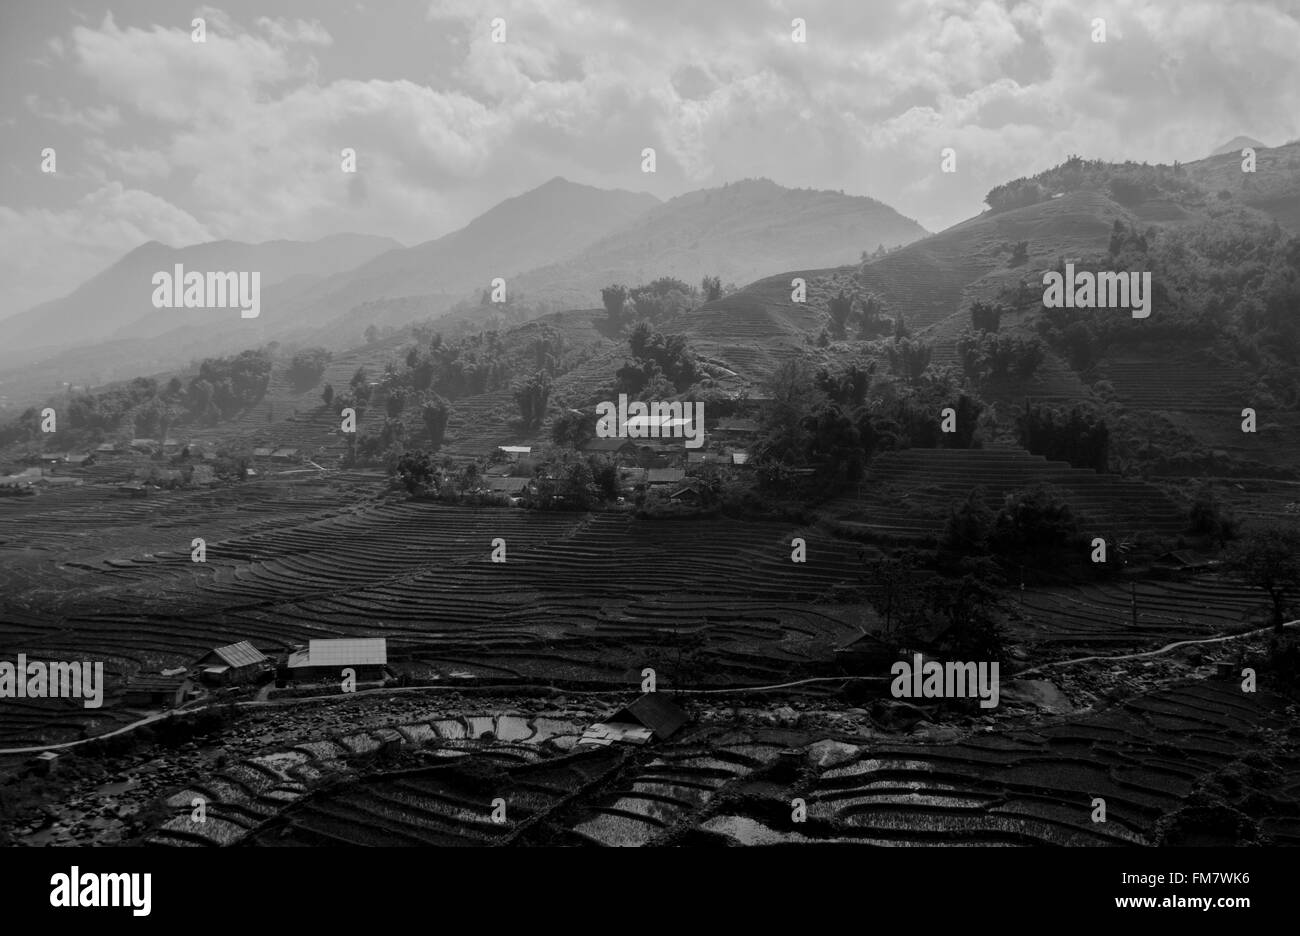 A view of the rice fields and hills of Sapa, Vietnam, converted to black and white Stock Photo